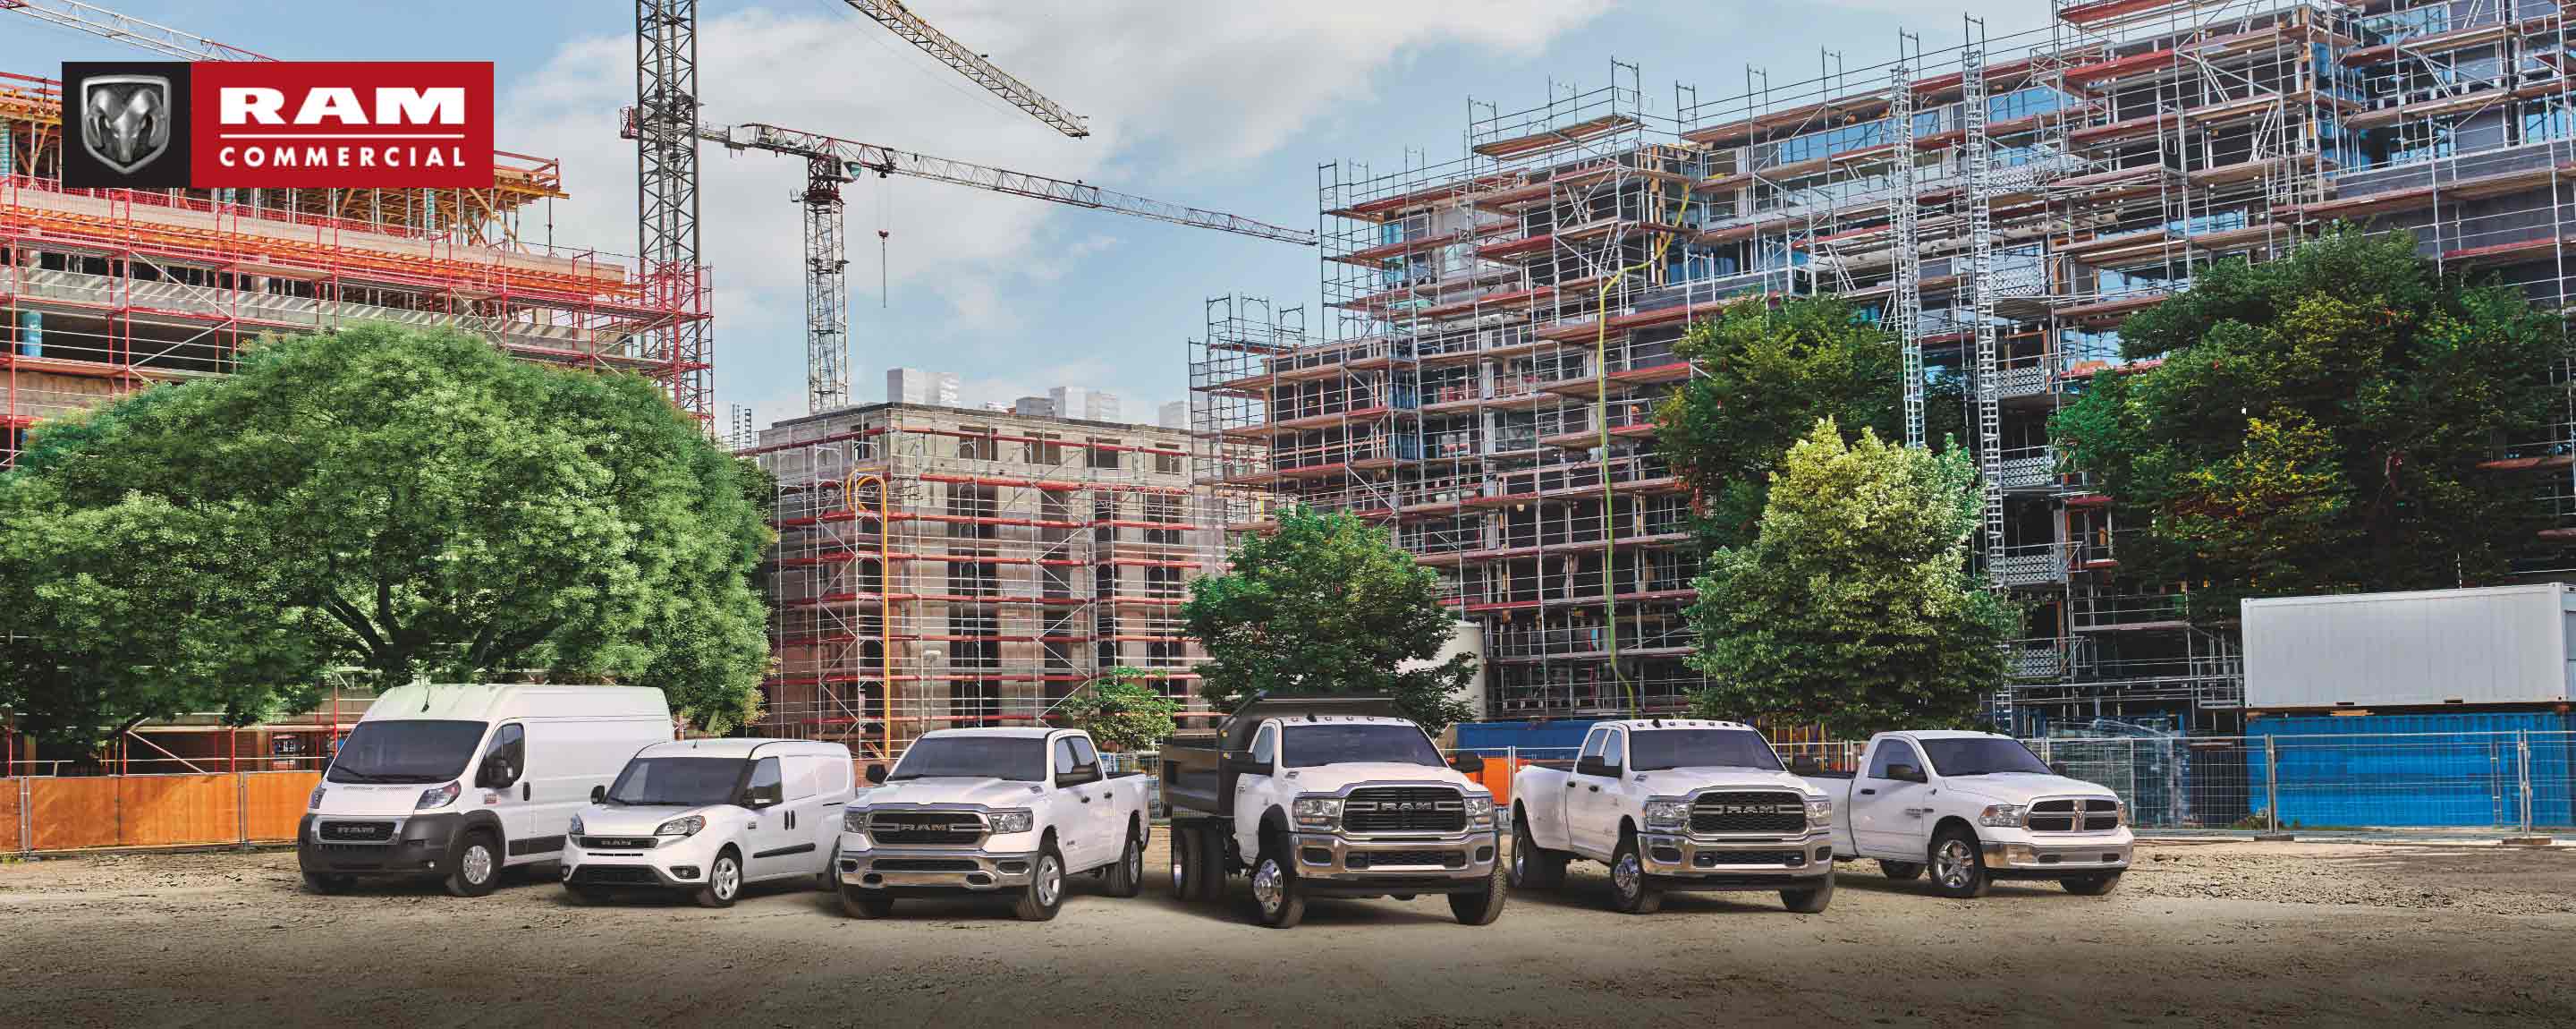 Ram Commercial. The 2022 Ram lineup parked at a massive commercial construction site. From left to right: a Ram ProMaster High Roof, Ram ProMaster City Cargo Van, Ram 1500, Ram 5500 Chassis Cab with dump body, Ram 3500 and Ram 1500 Classic.